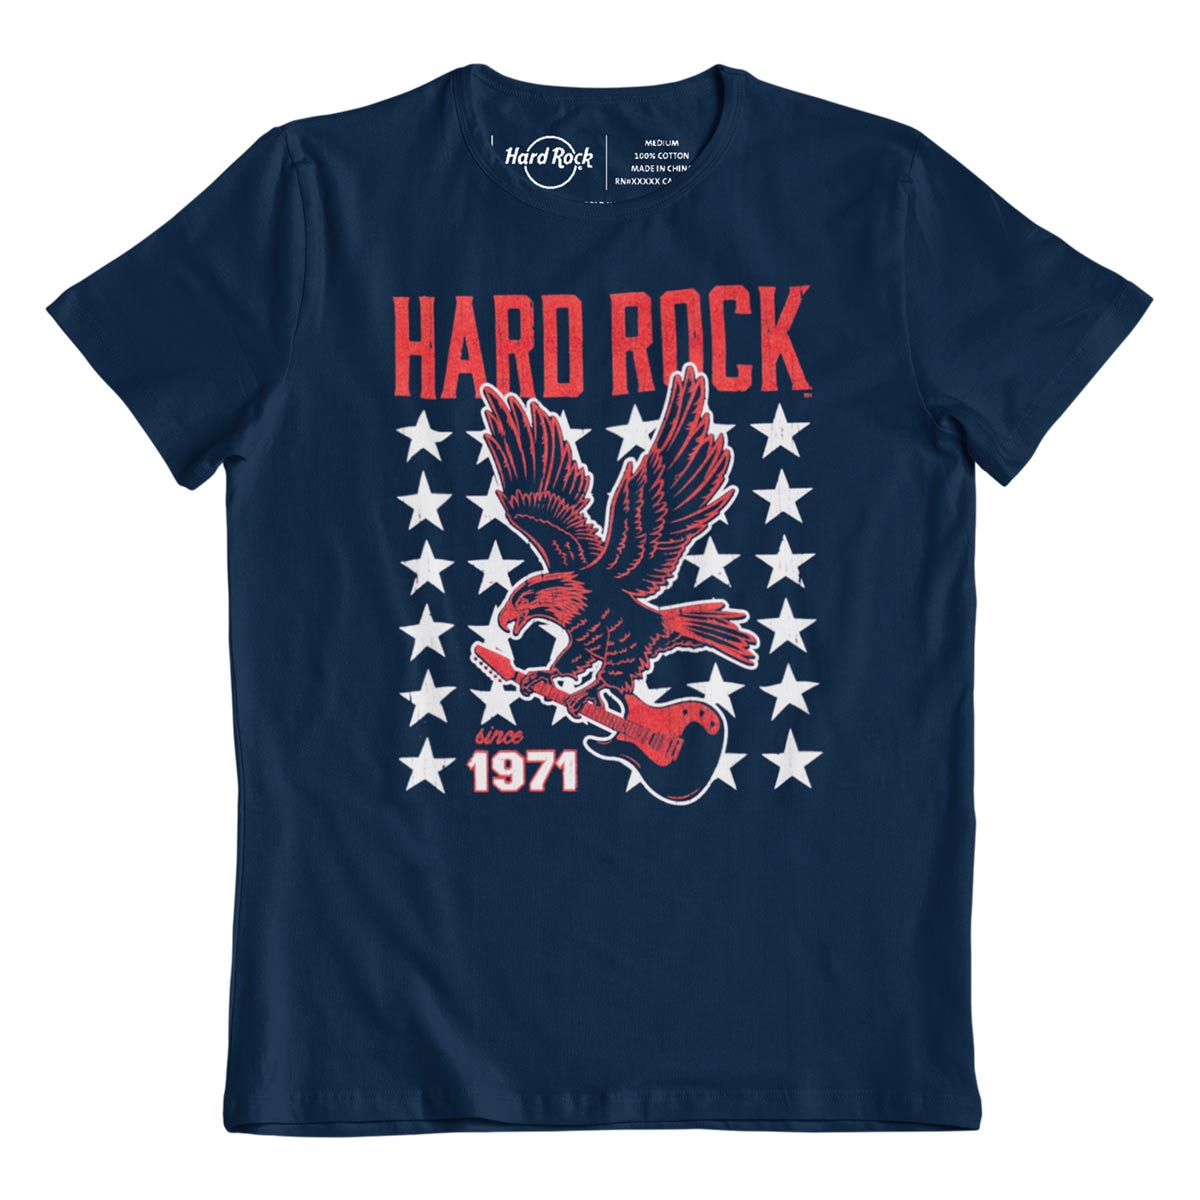 Americana Adult Fit Navy Tee with Eagle Guitar Stars Motif image number 4